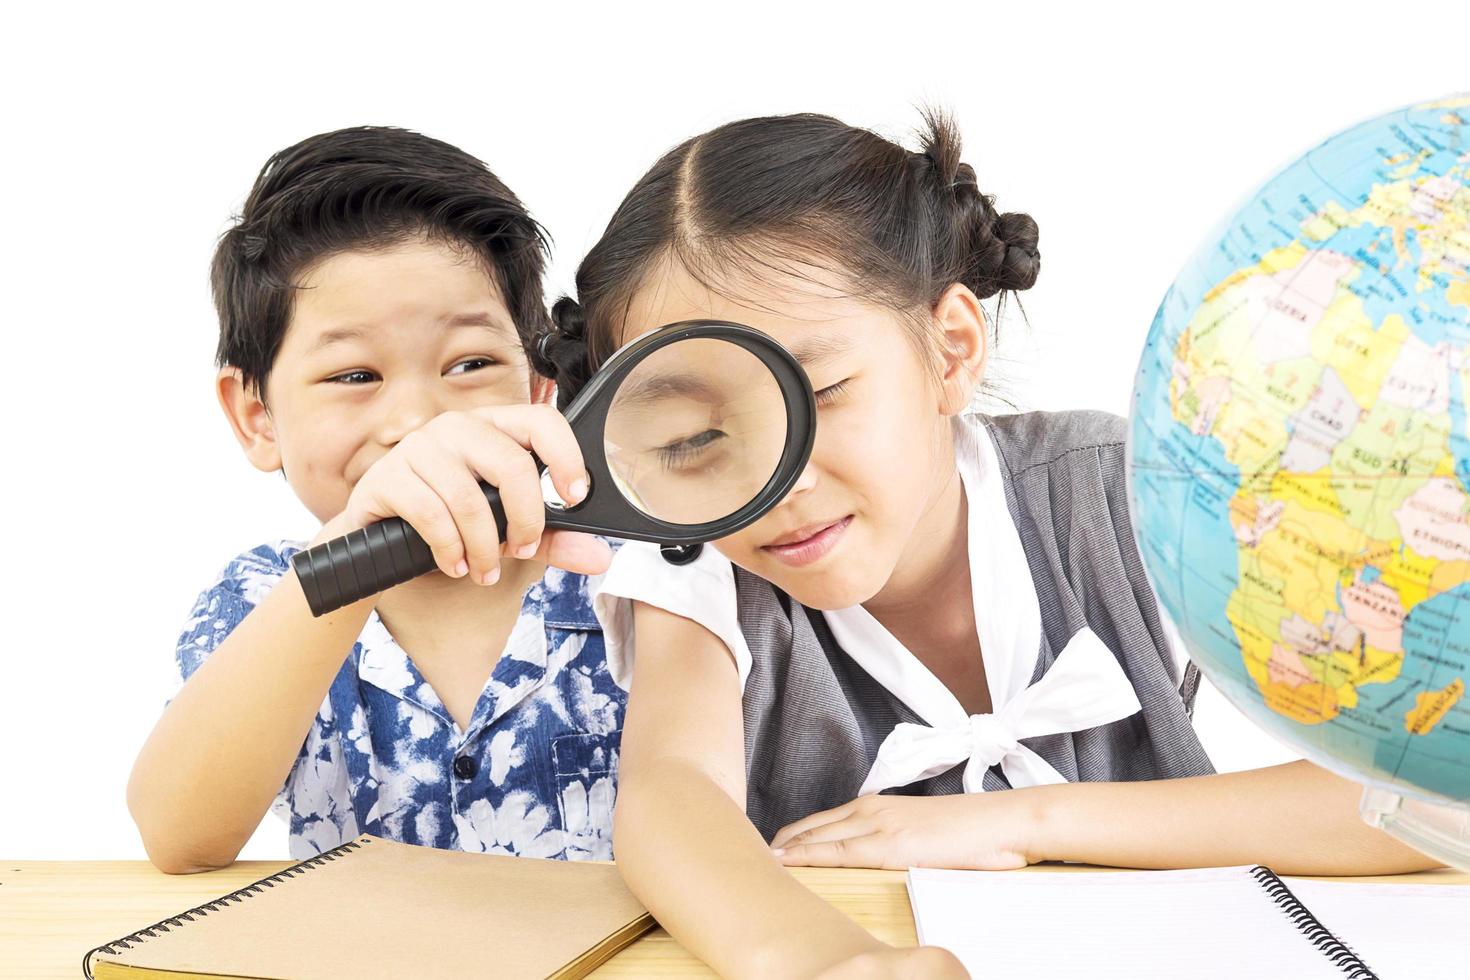 Asian kids are studying the globe using magnifier over white background photo